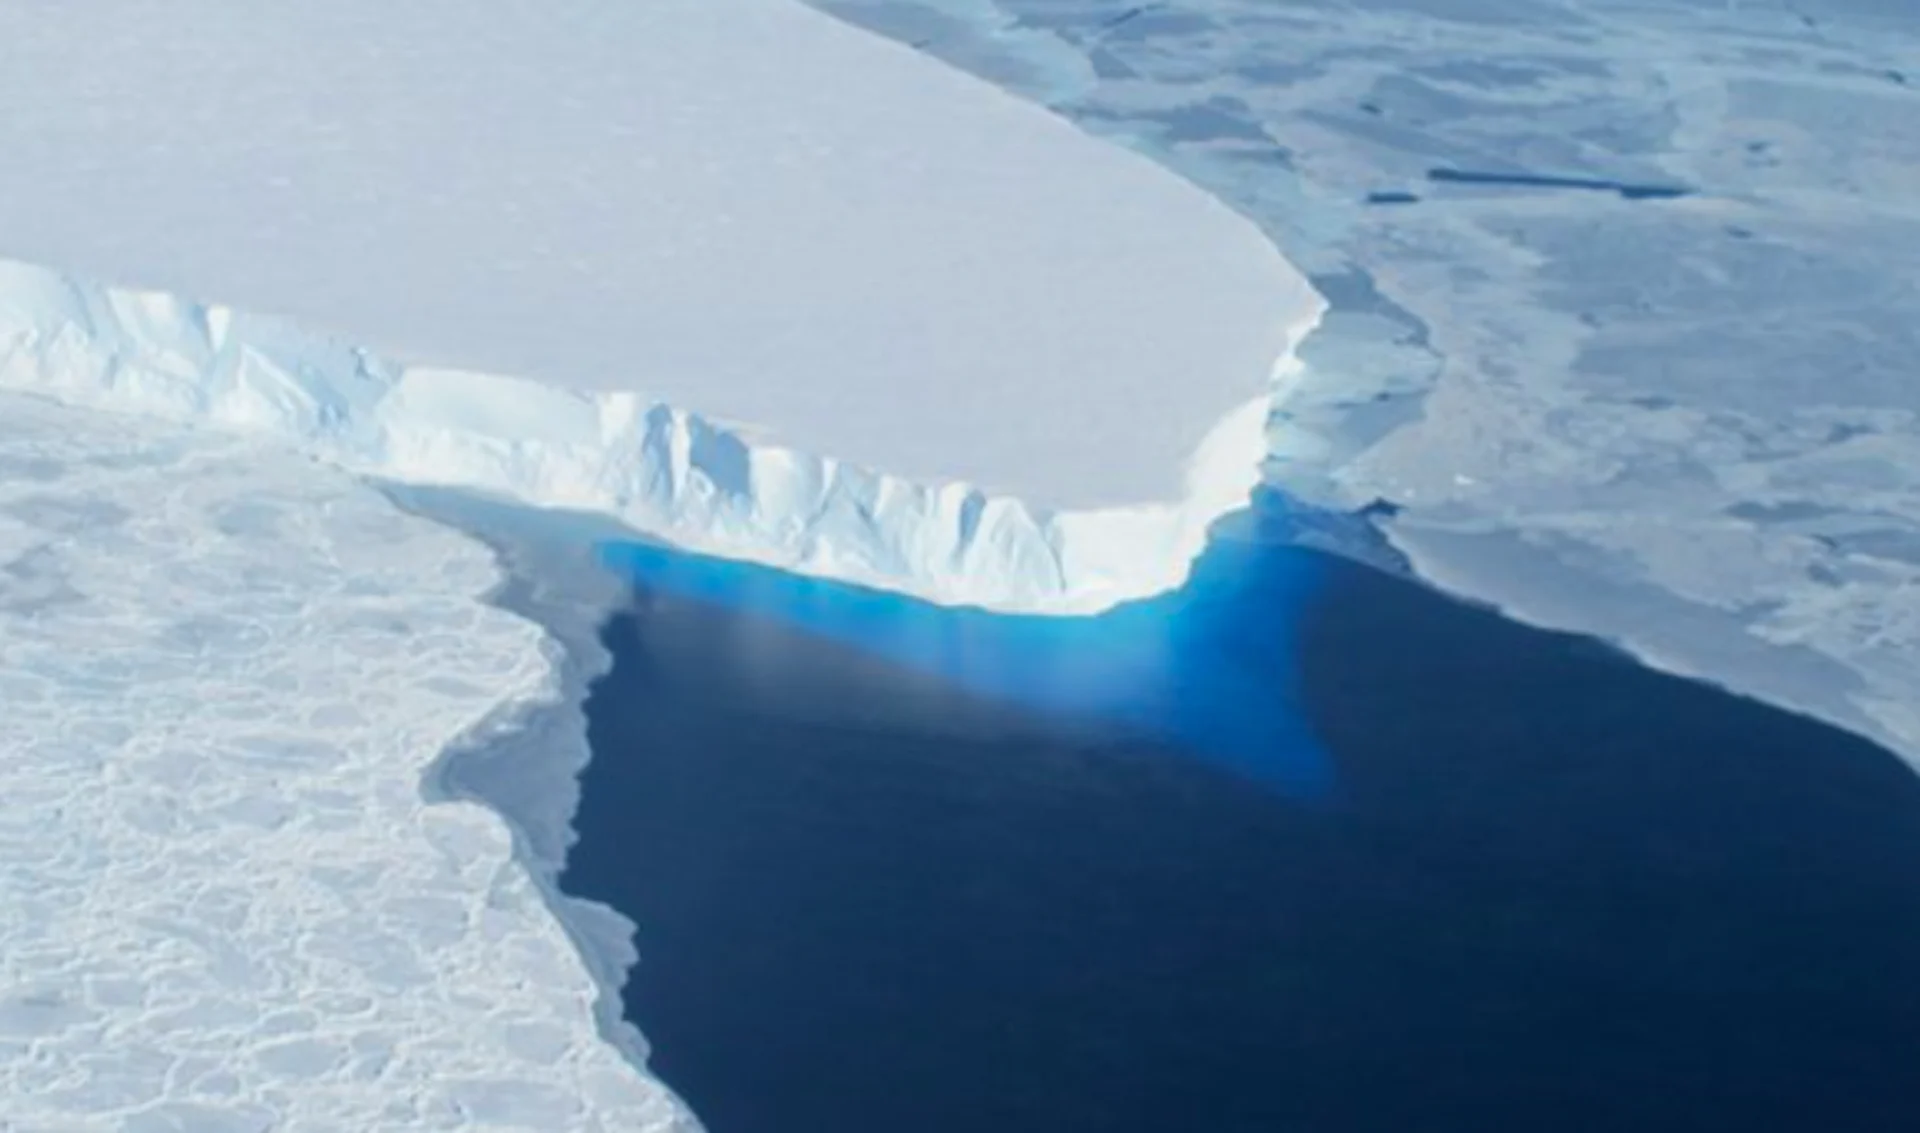 For the first time, visual evidence of warm sea water pushing under the doomsday glacier has surfaced, a study shows